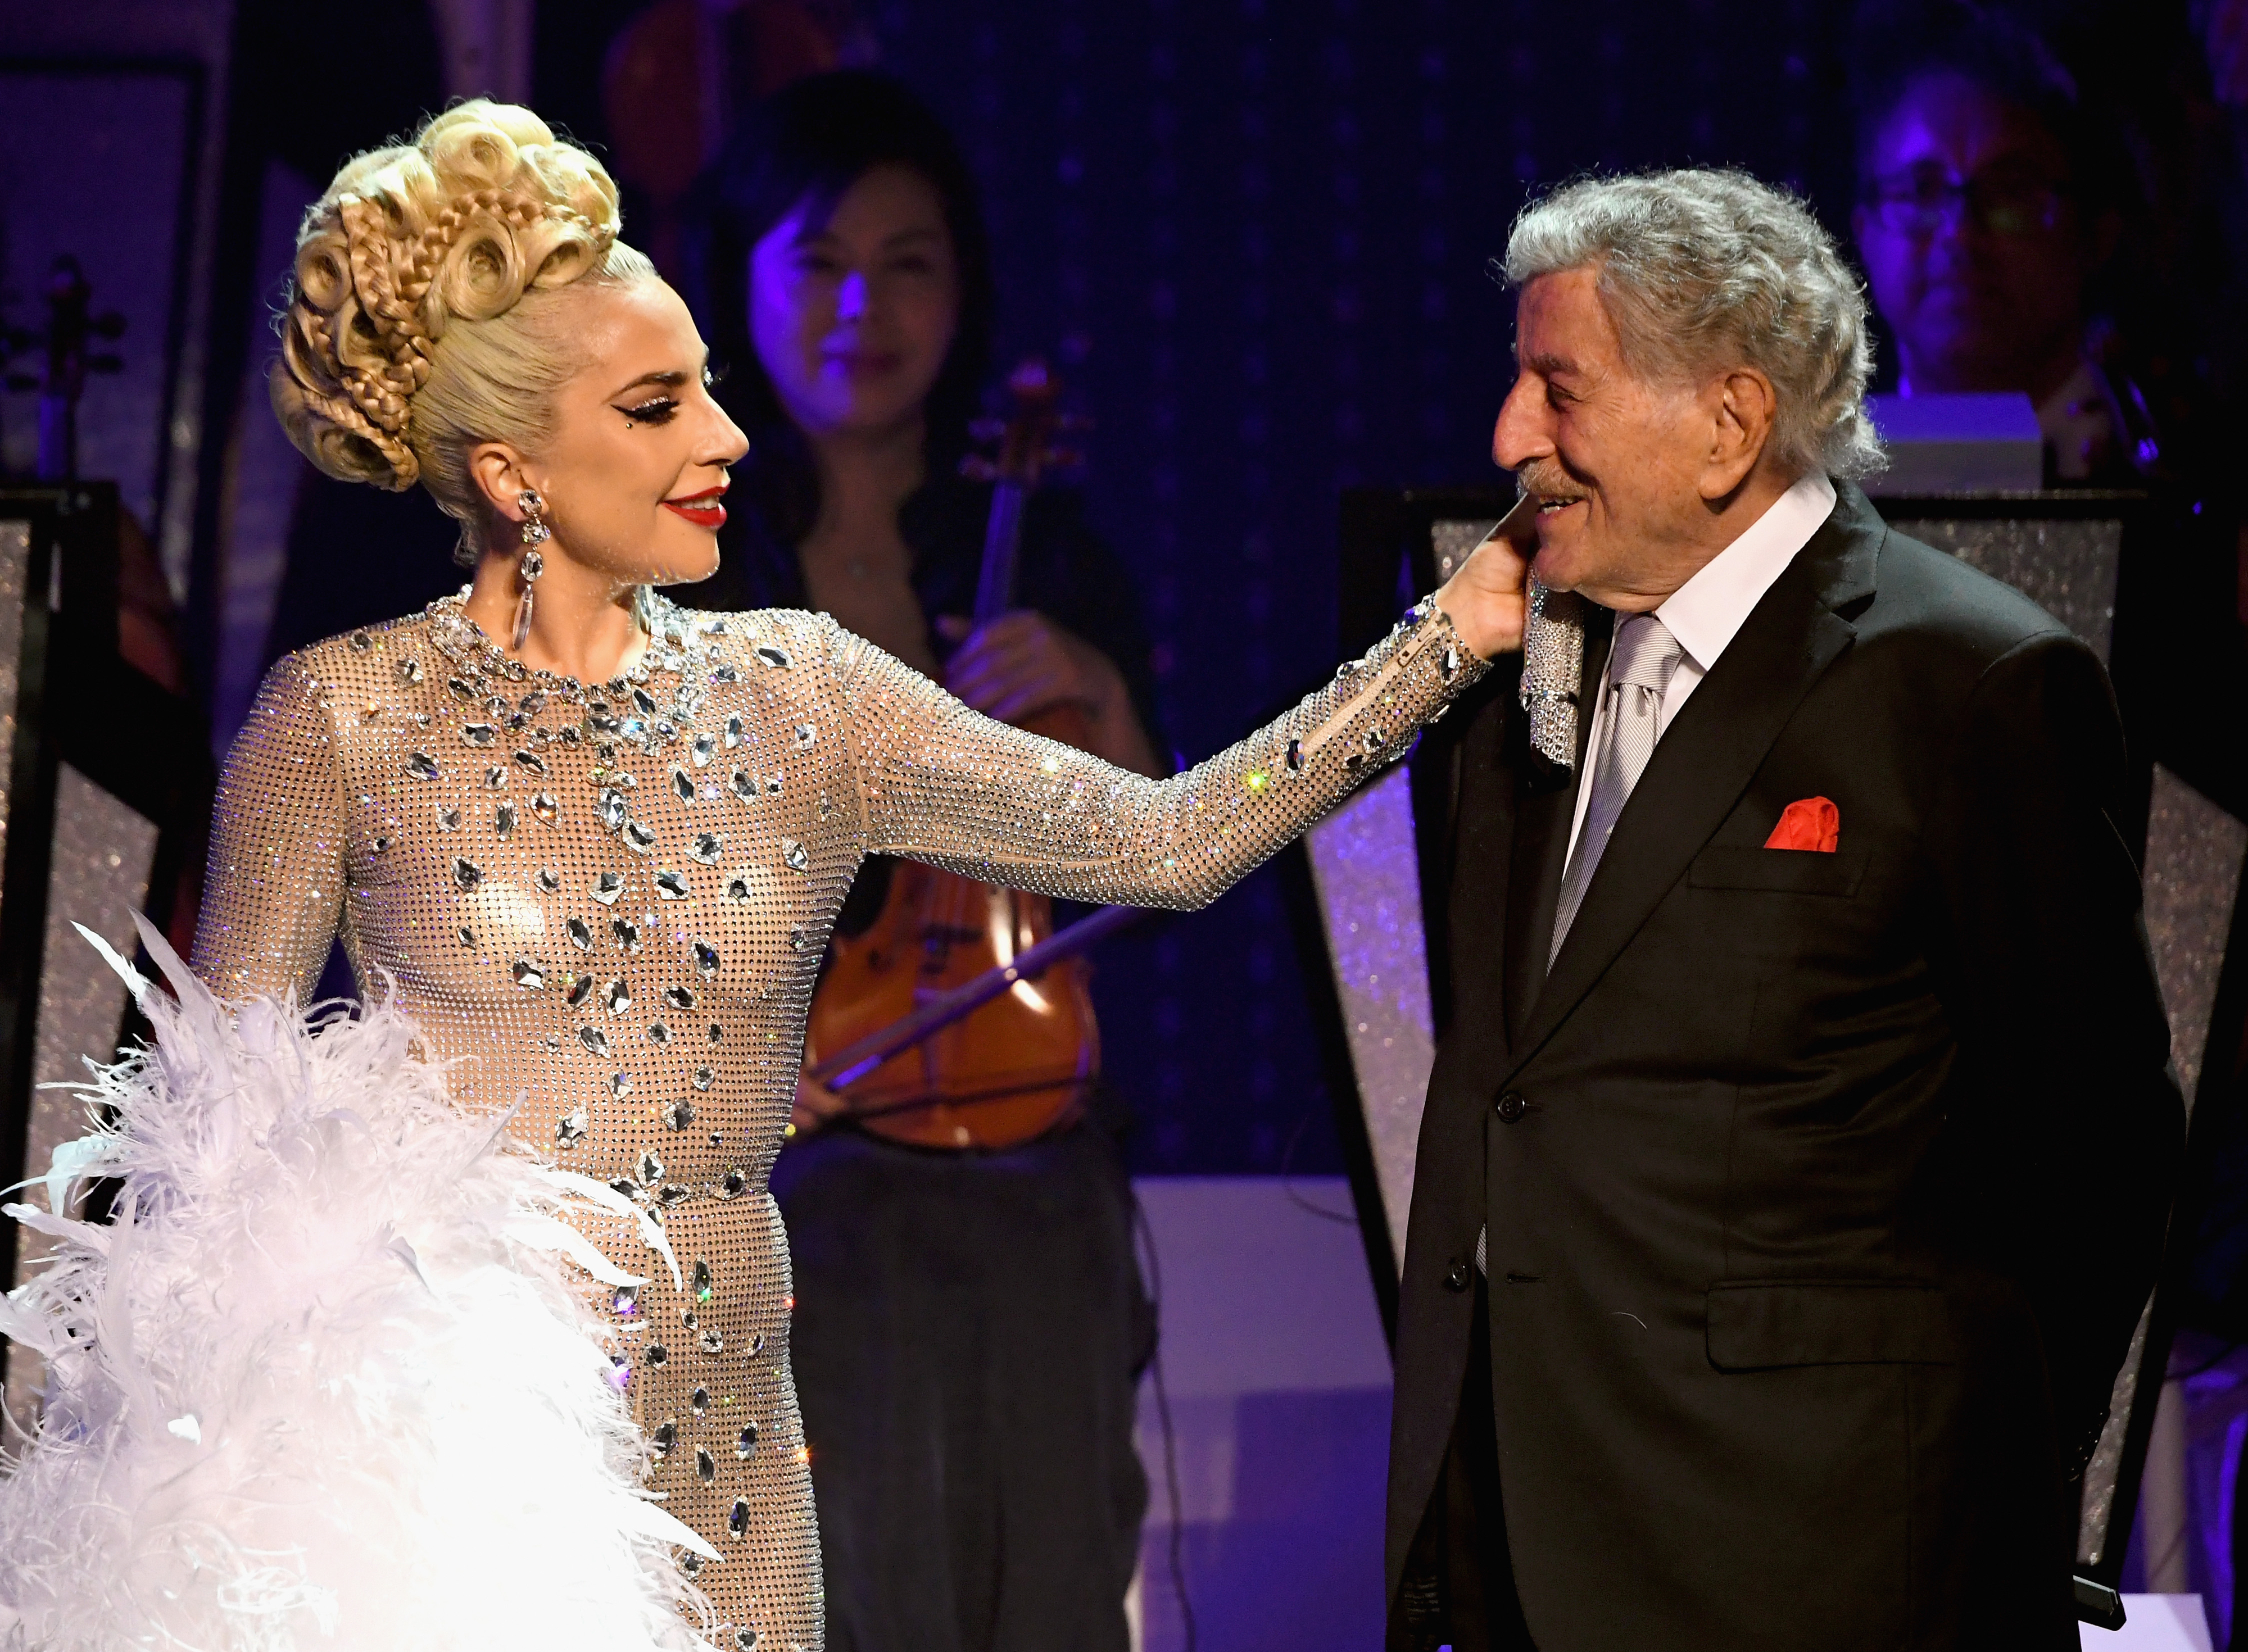 Tony and Gaga performing onstage